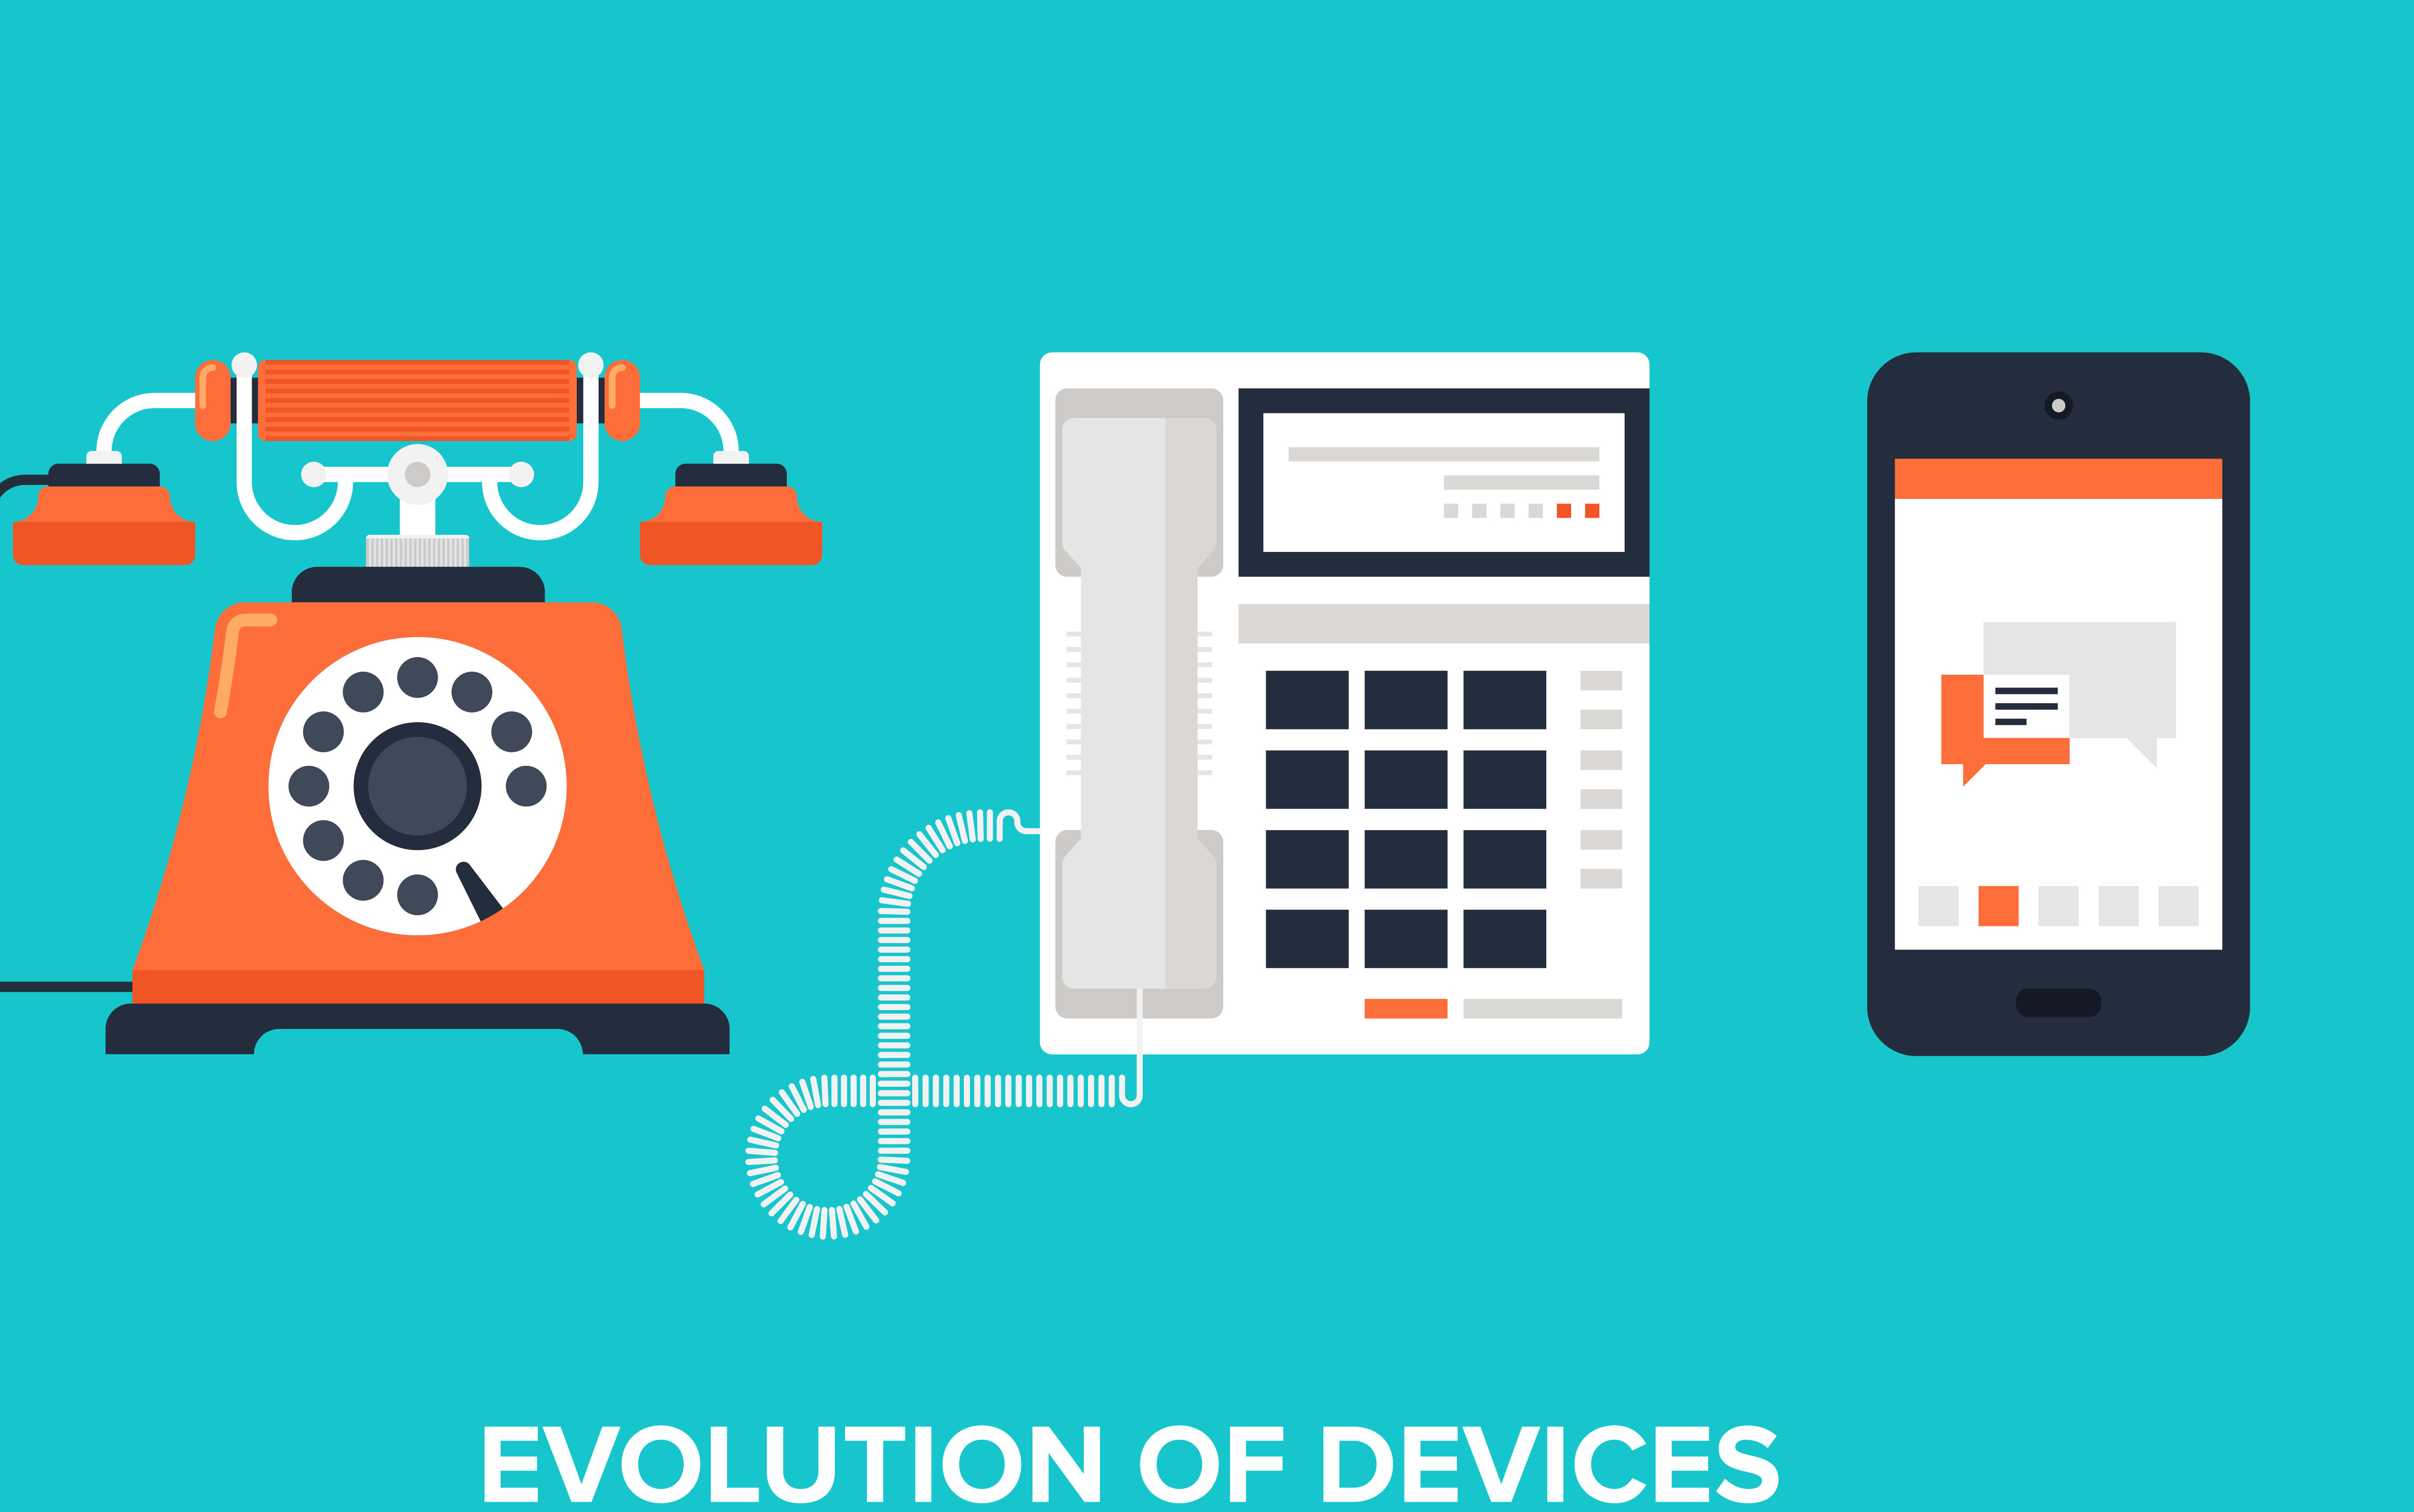 Flat vector illustration of evolution of communication devices from classic phone to modern mobile phone.